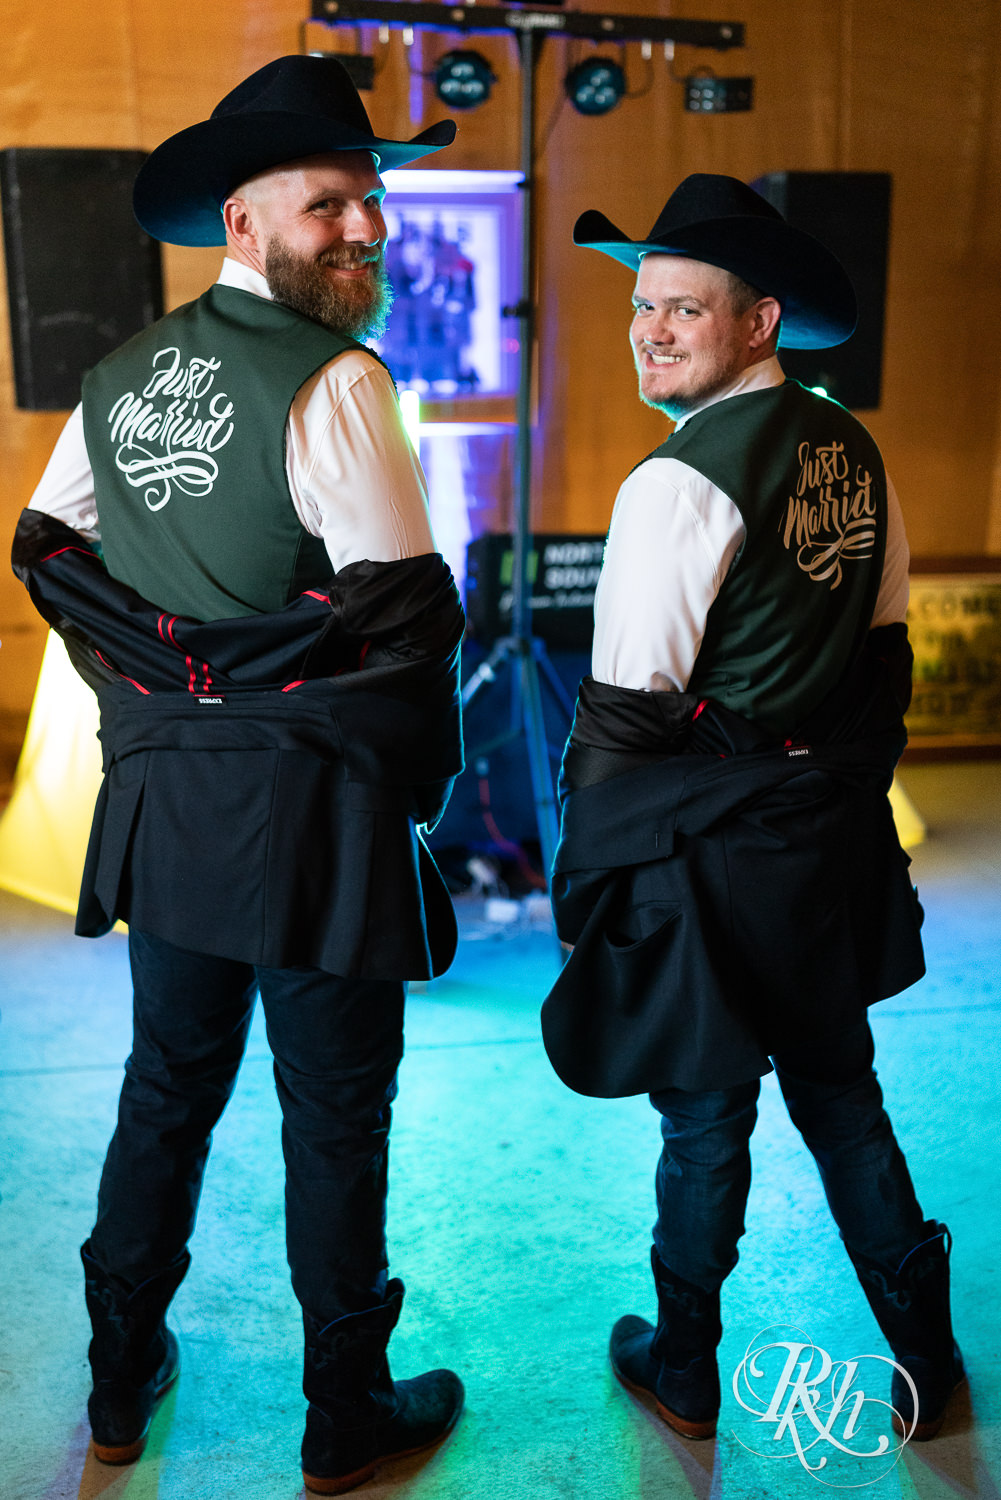 Grooms showing off Just Married vests at their wedding reception. .